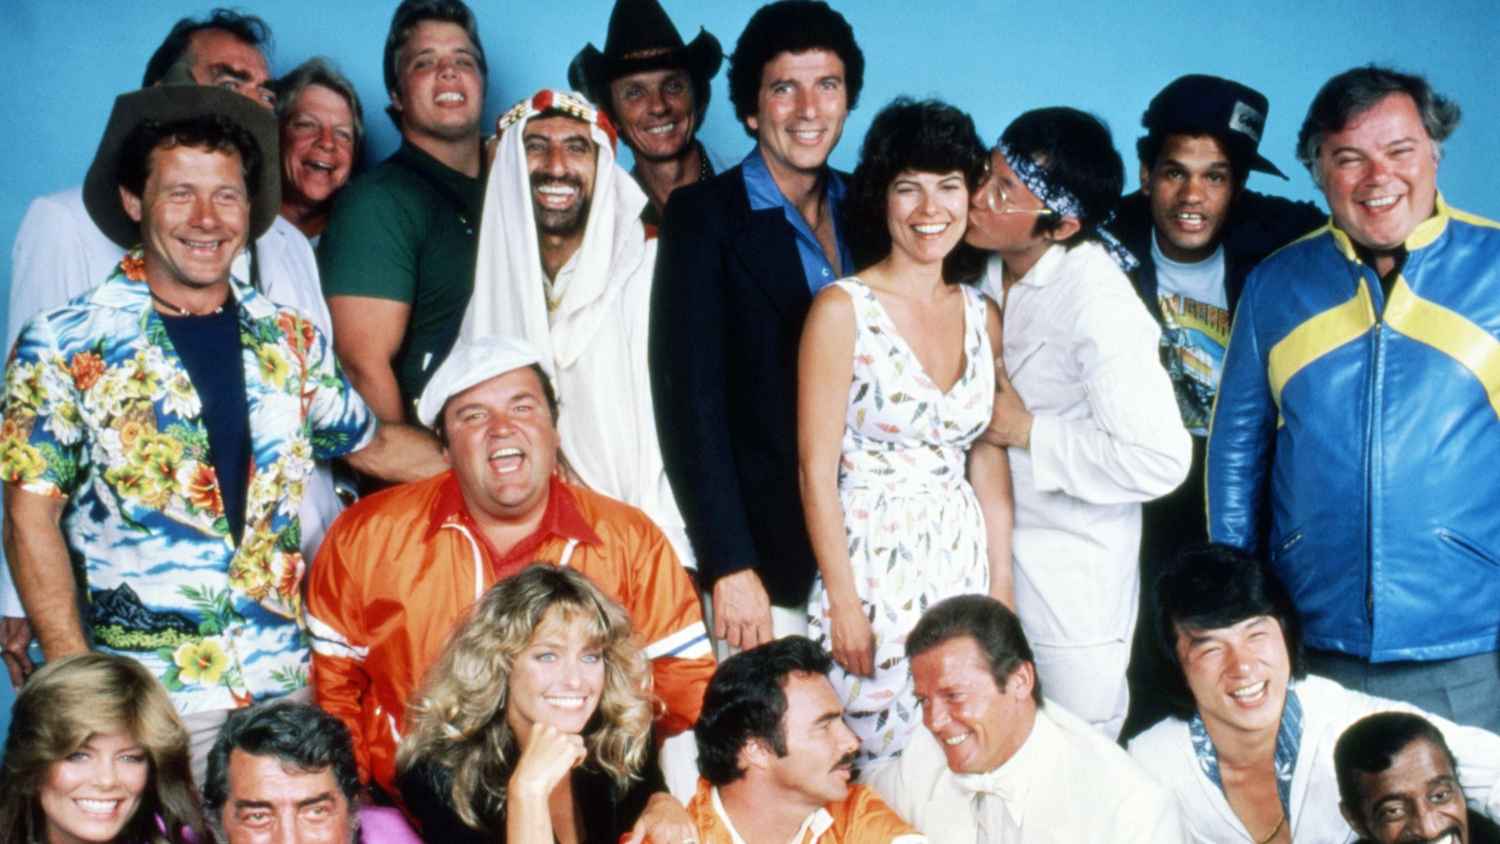 The Cannonball Run streaming: where to watch online?